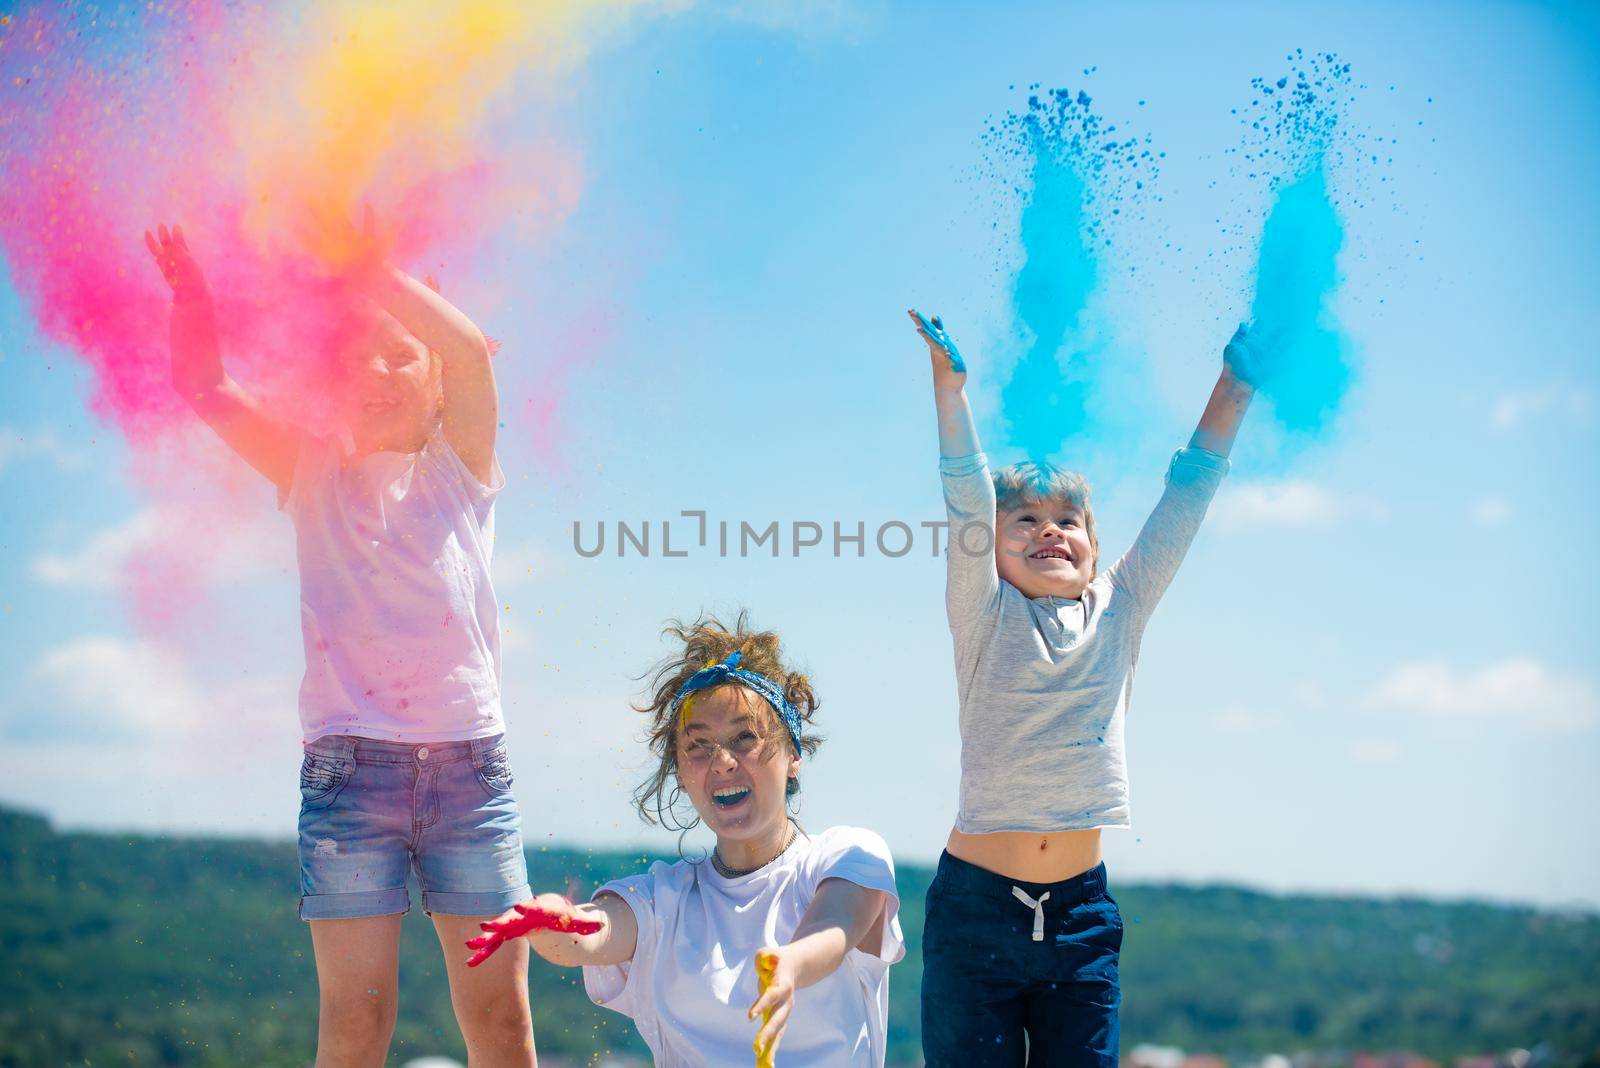 Excited children painted in the colors of Holi festival. Kids splashing colorful paint. by Tverdokhlib